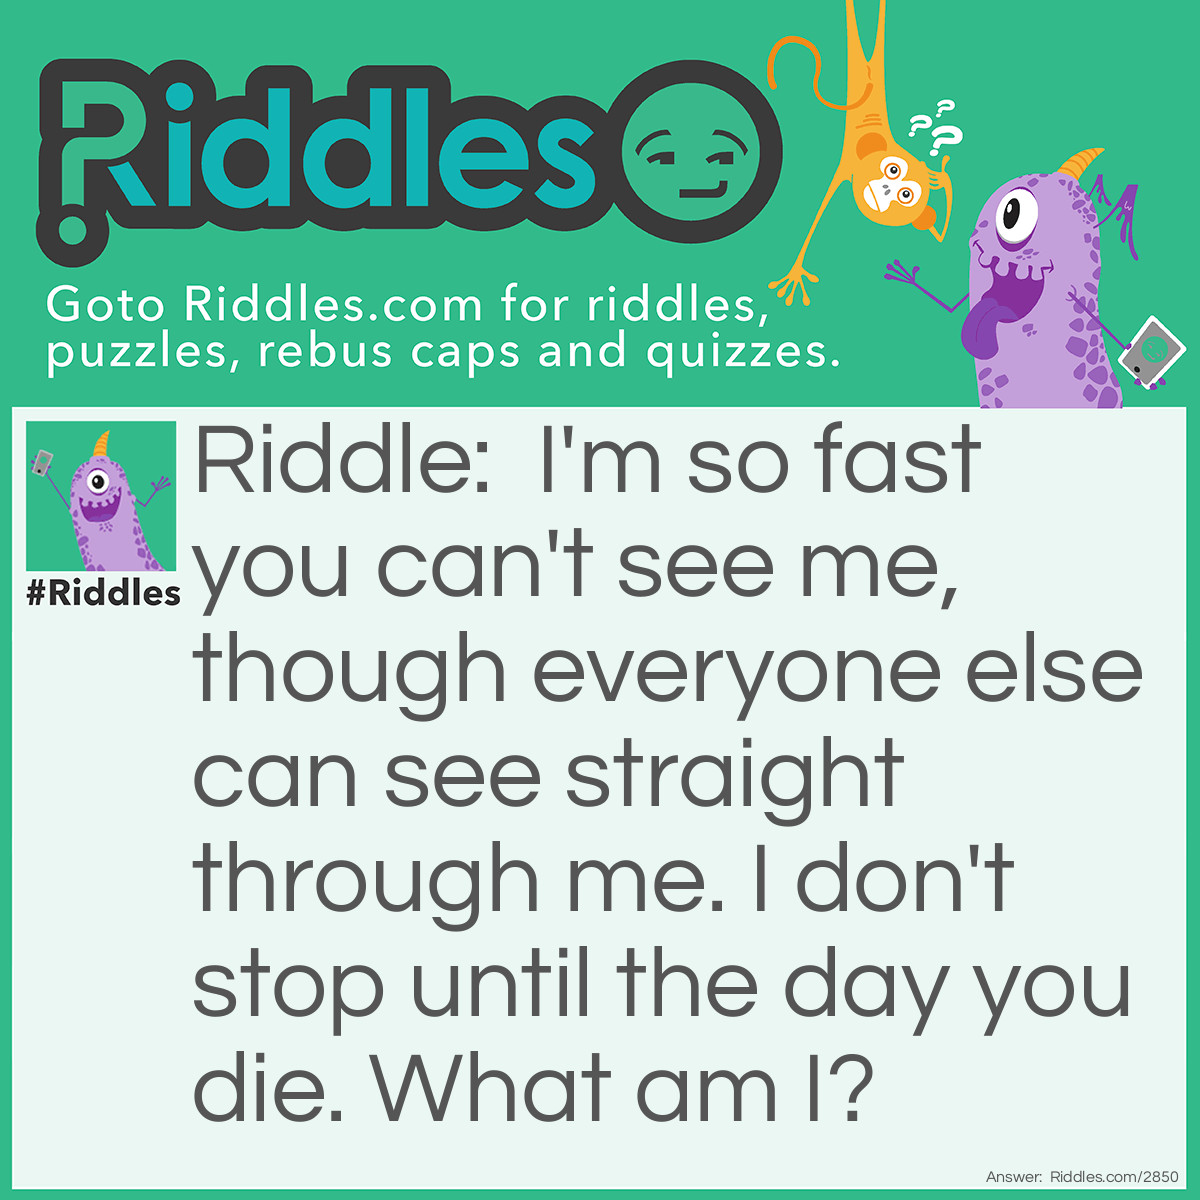 Riddle: I'm so fast you can't see me, though everyone else can see straight through me. I won't stop until the day you die. What am I? Answer: The blink of an eye.